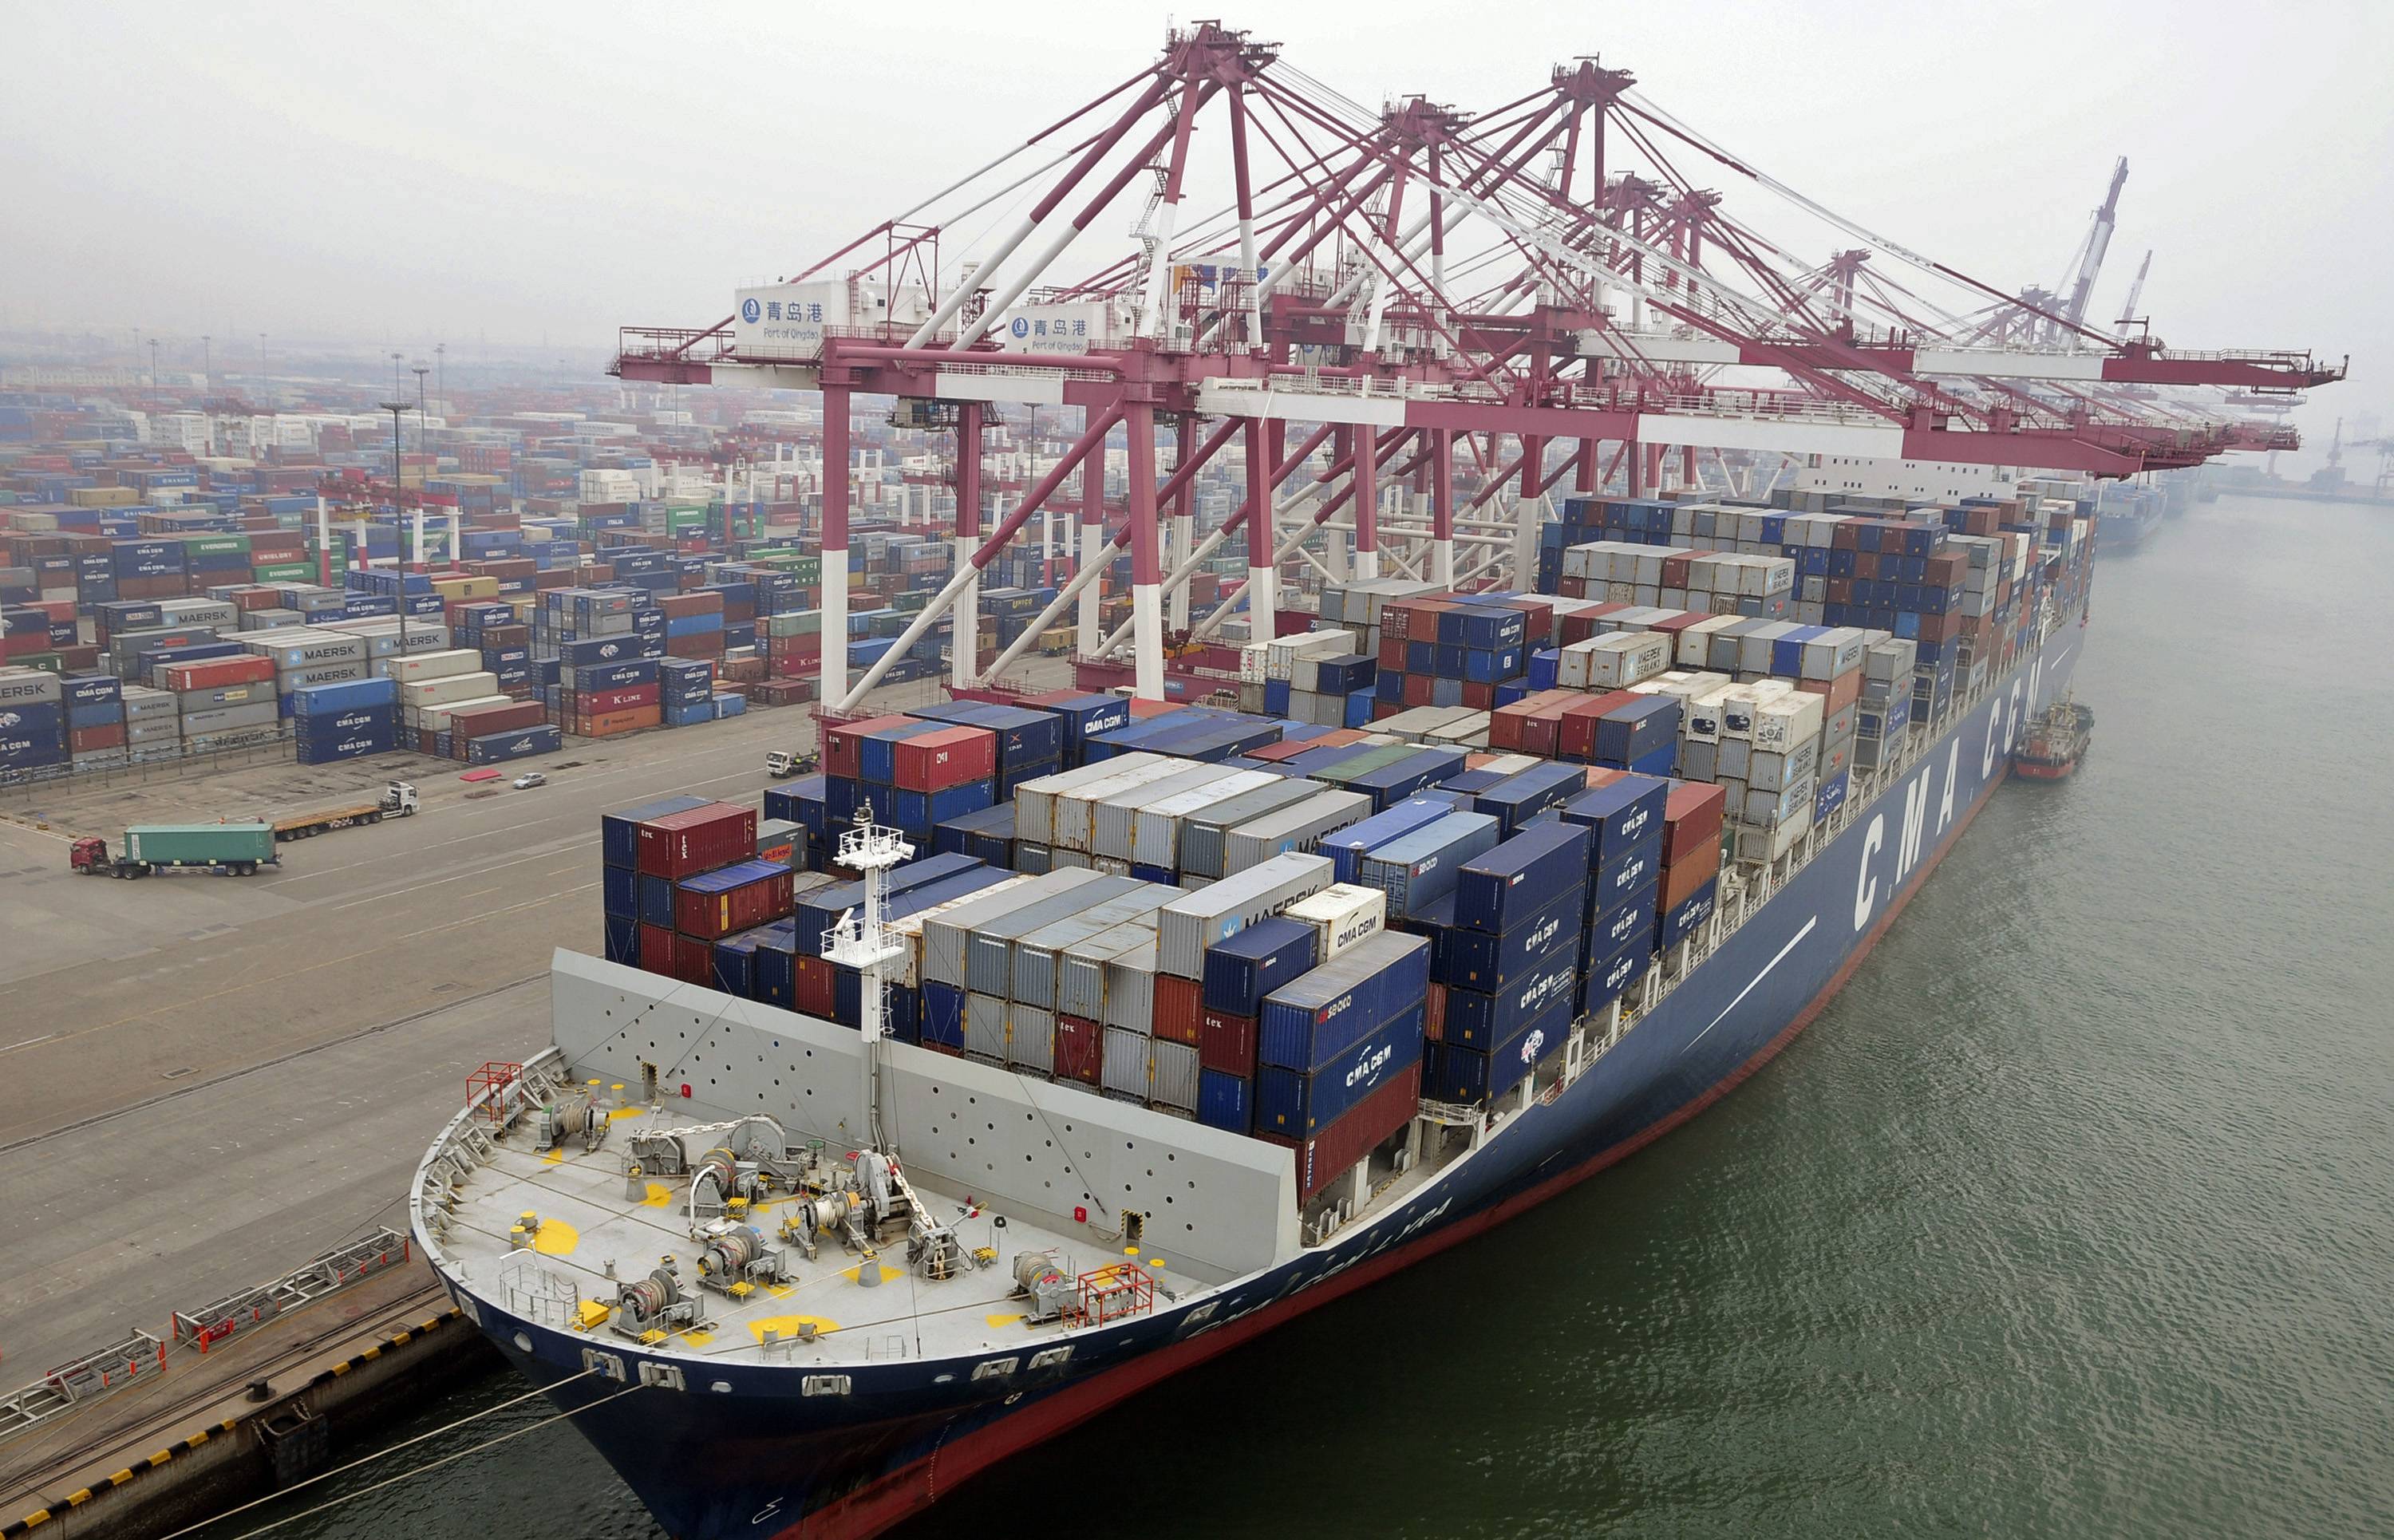 A cargo ship loaded with containers is seen anchored at a port in Qingdao, Shandong province. Photo: Reuters